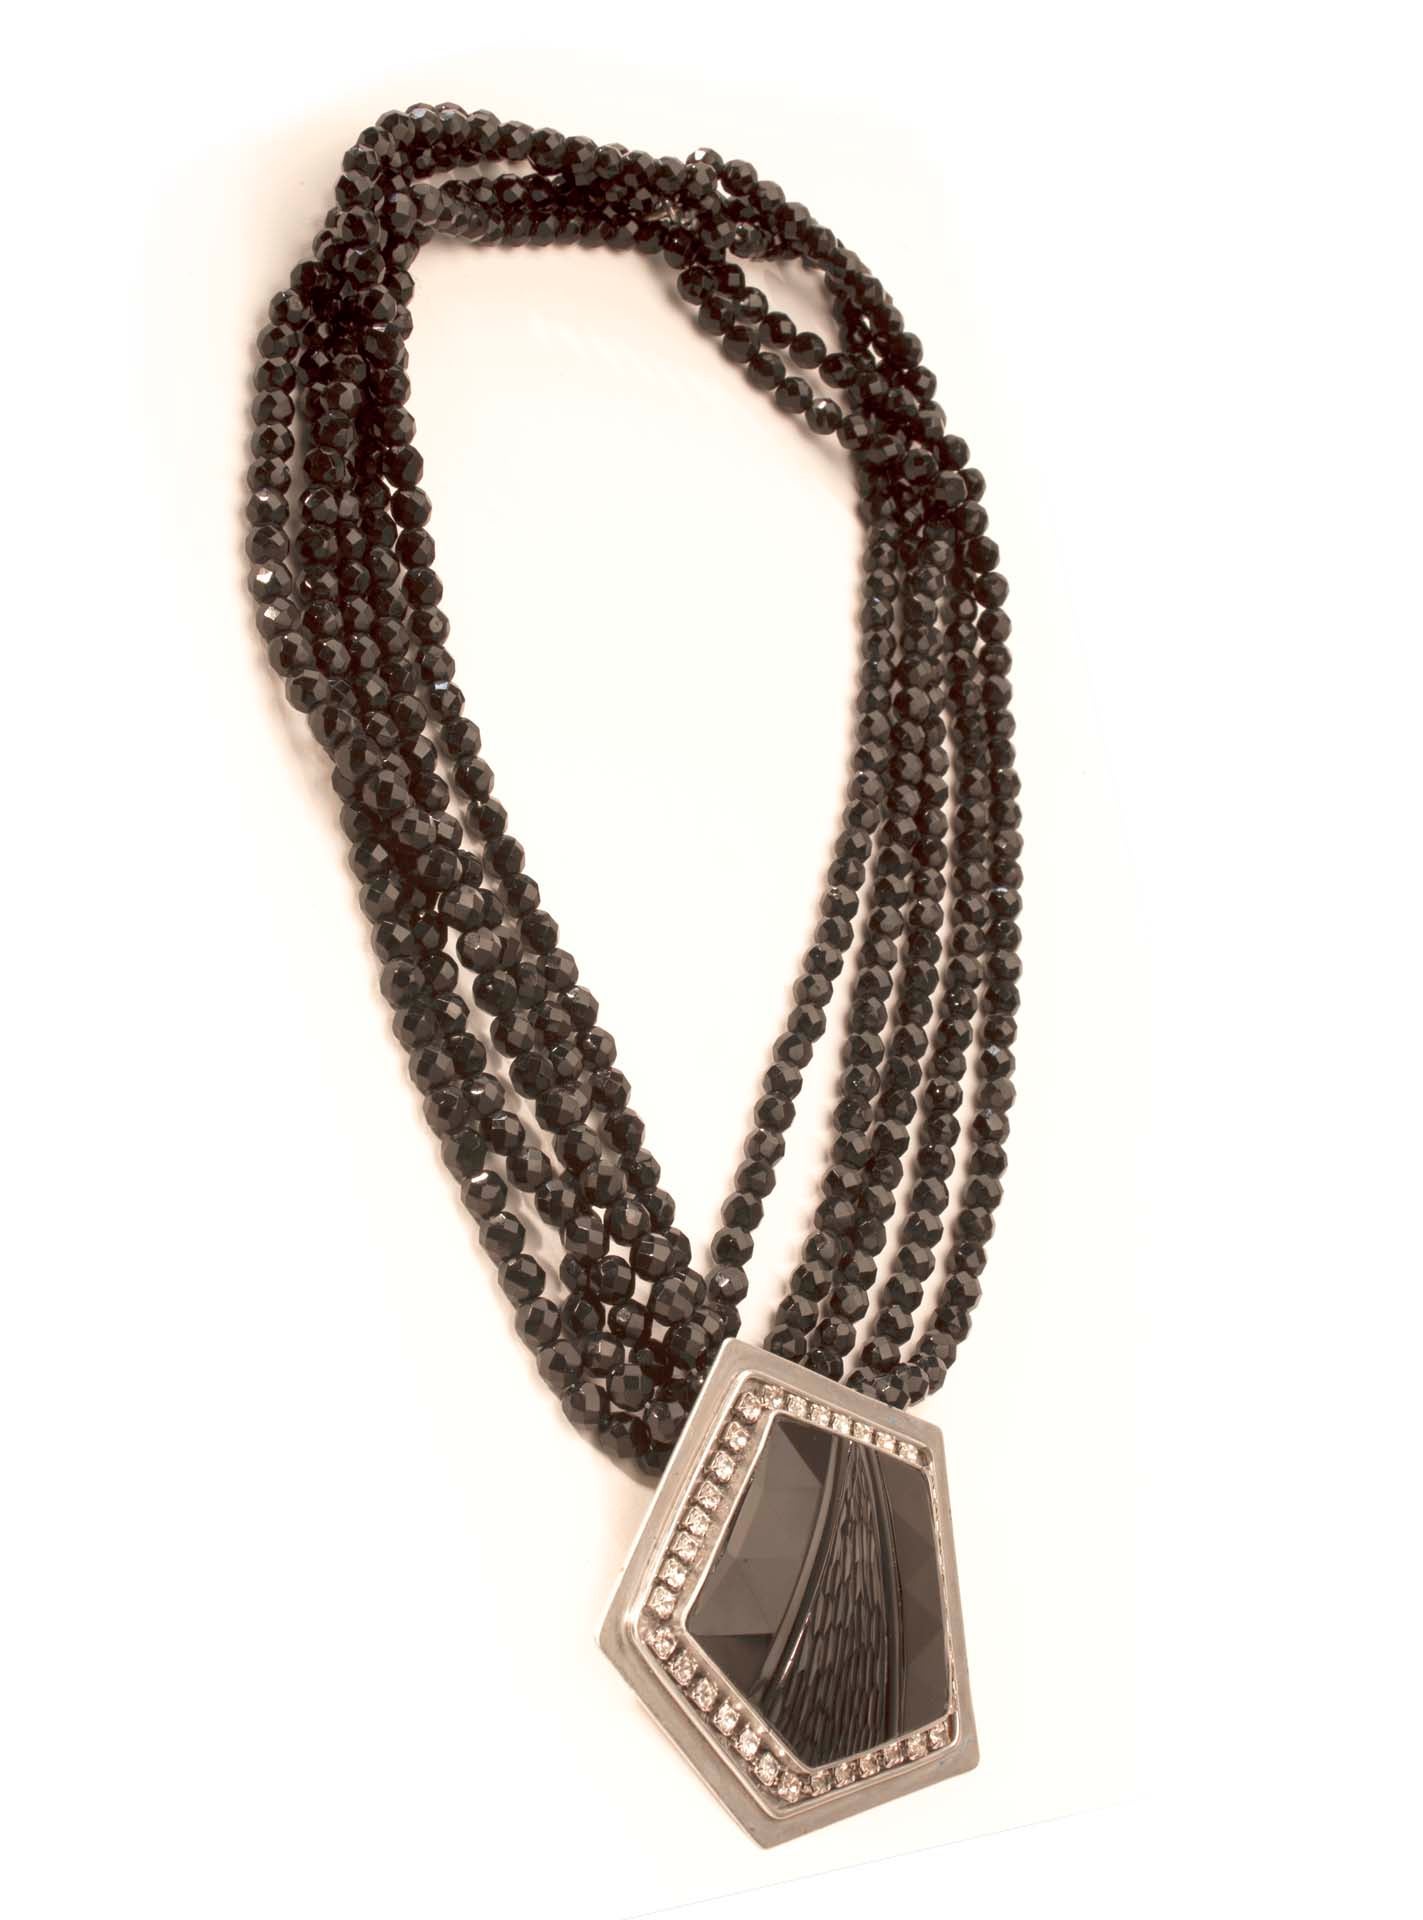 Beaded Jet Necklace with Jet Stone from India signed by Artist For Sale